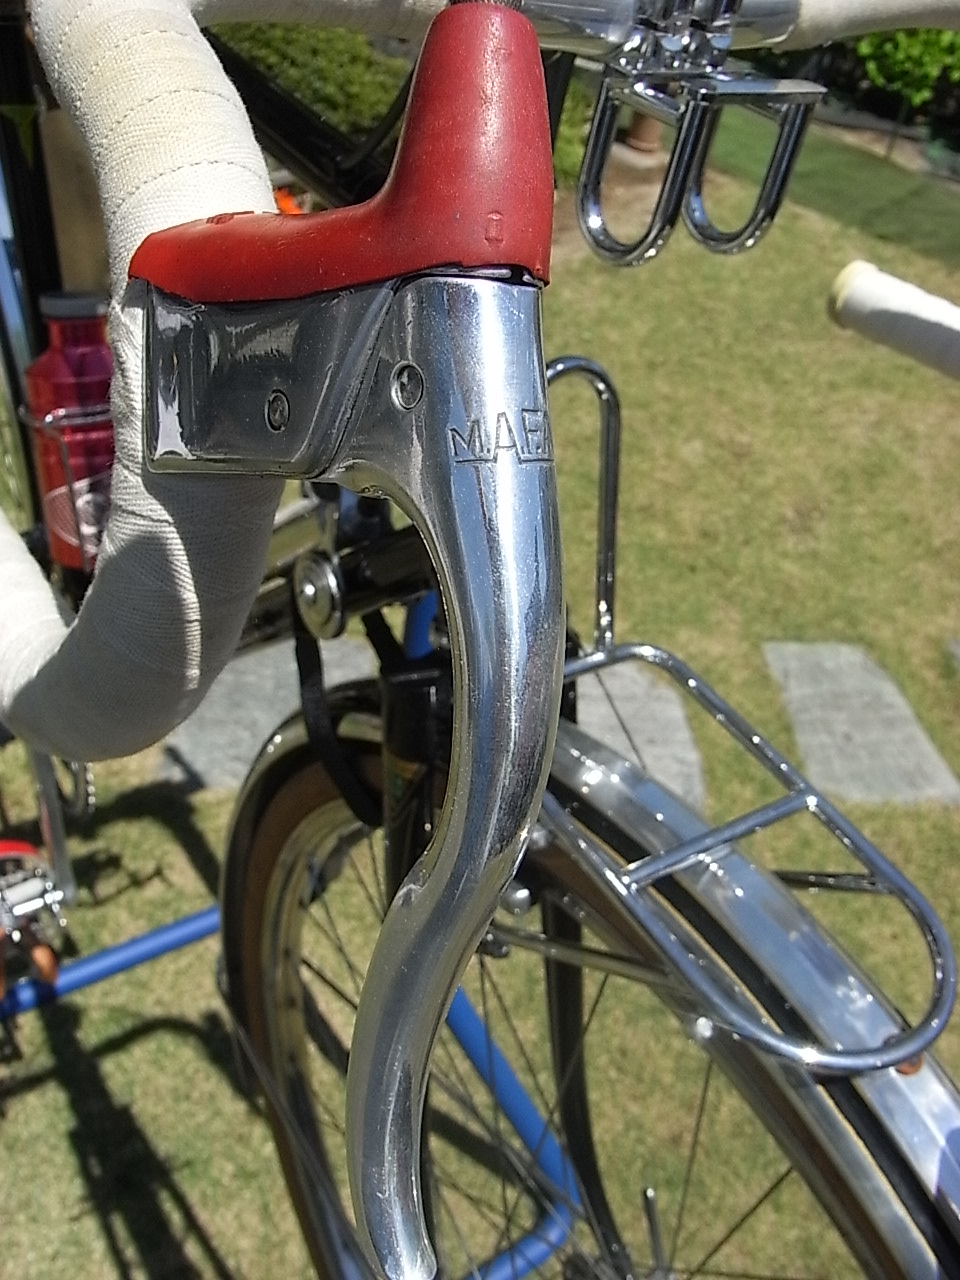 M.A.F.A.C brake levers with red hoods